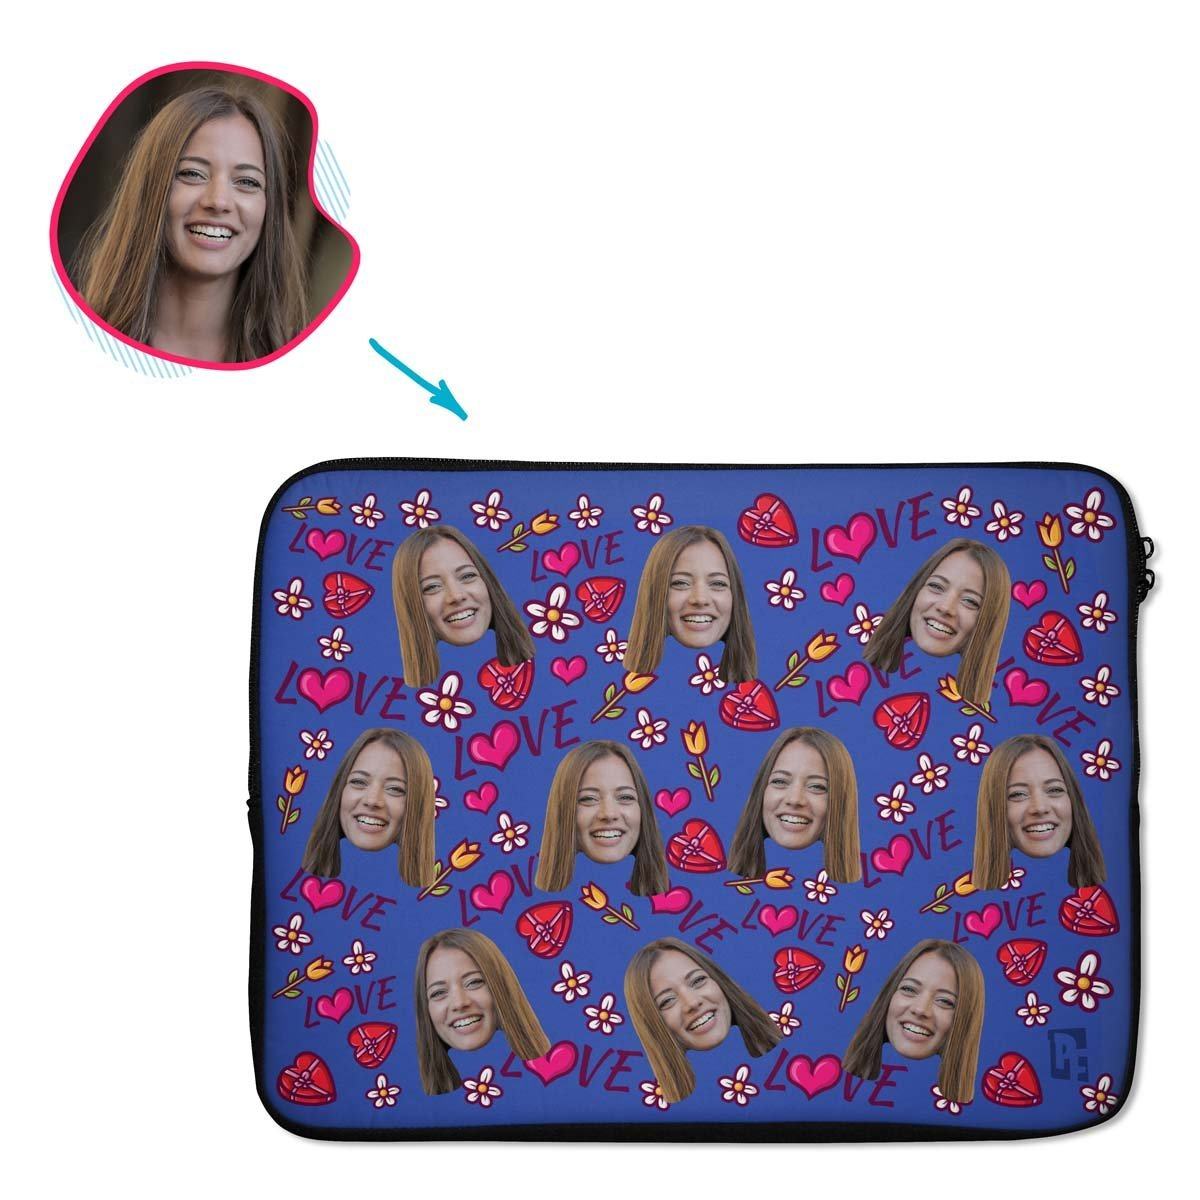 darkblue Hearts and Flowers laptop sleeve personalized with photo of face printed on them